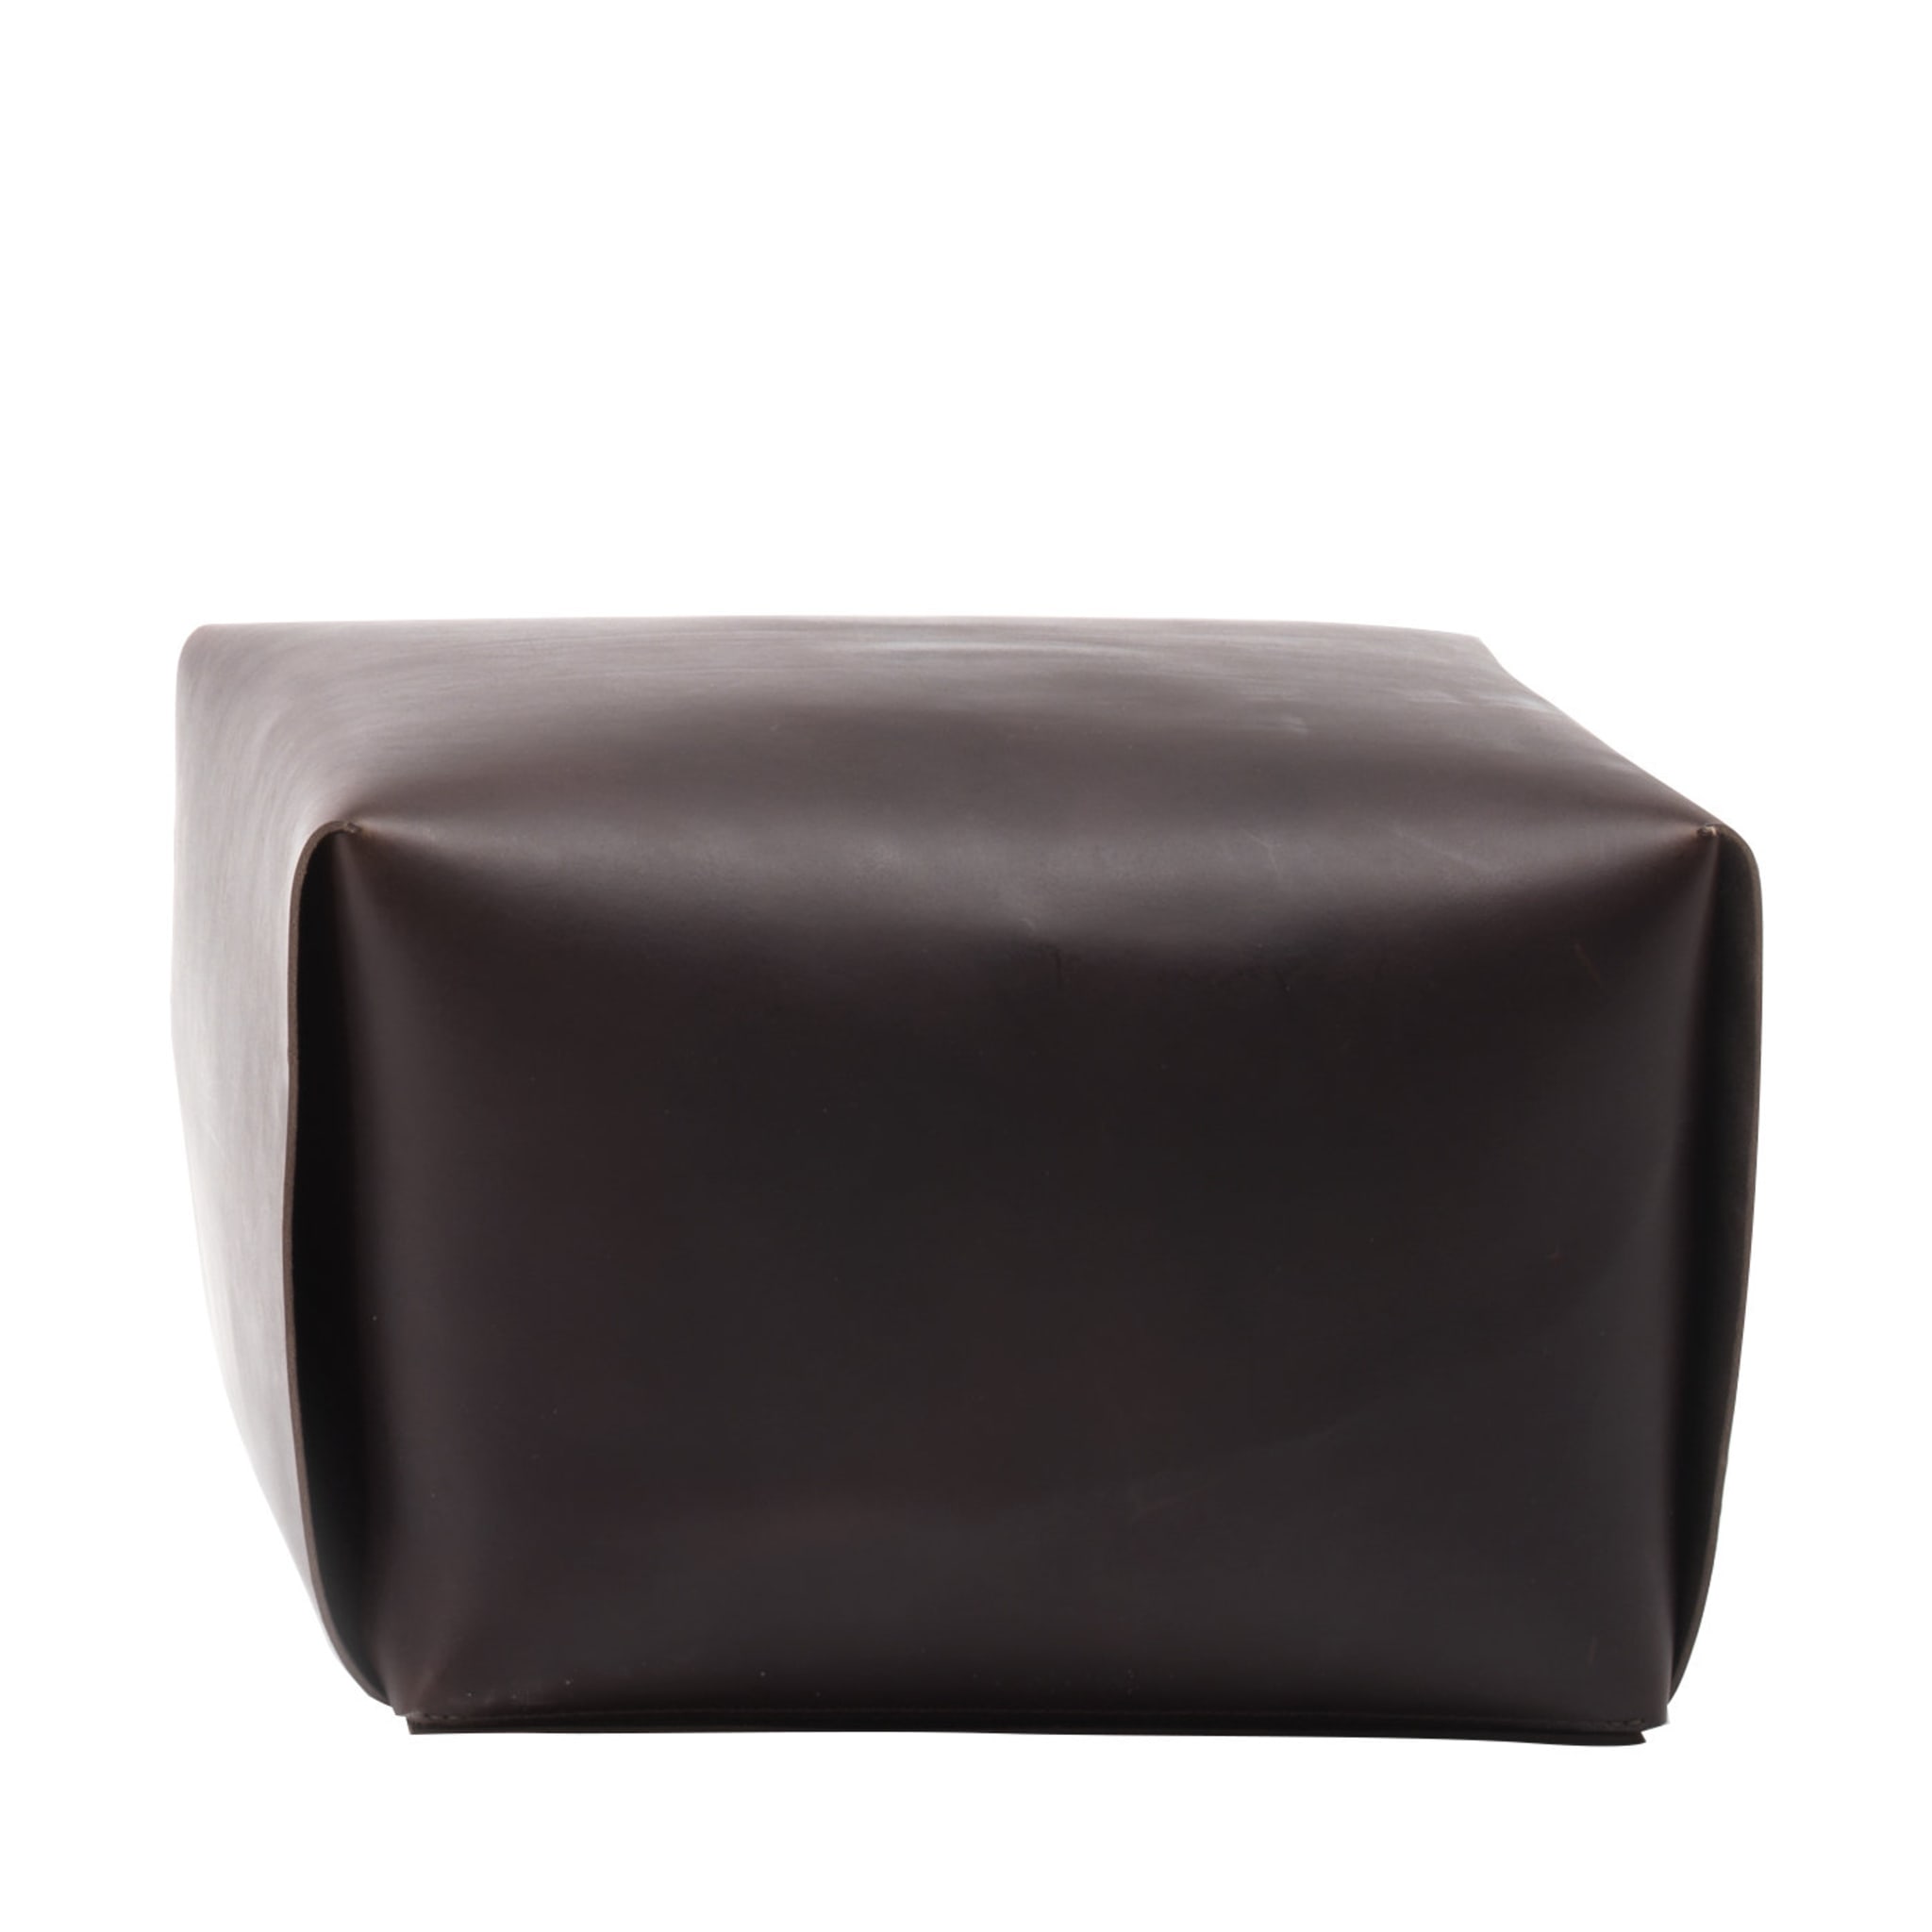 Bao Brown Leather Pouf ☞ Seat: Leather